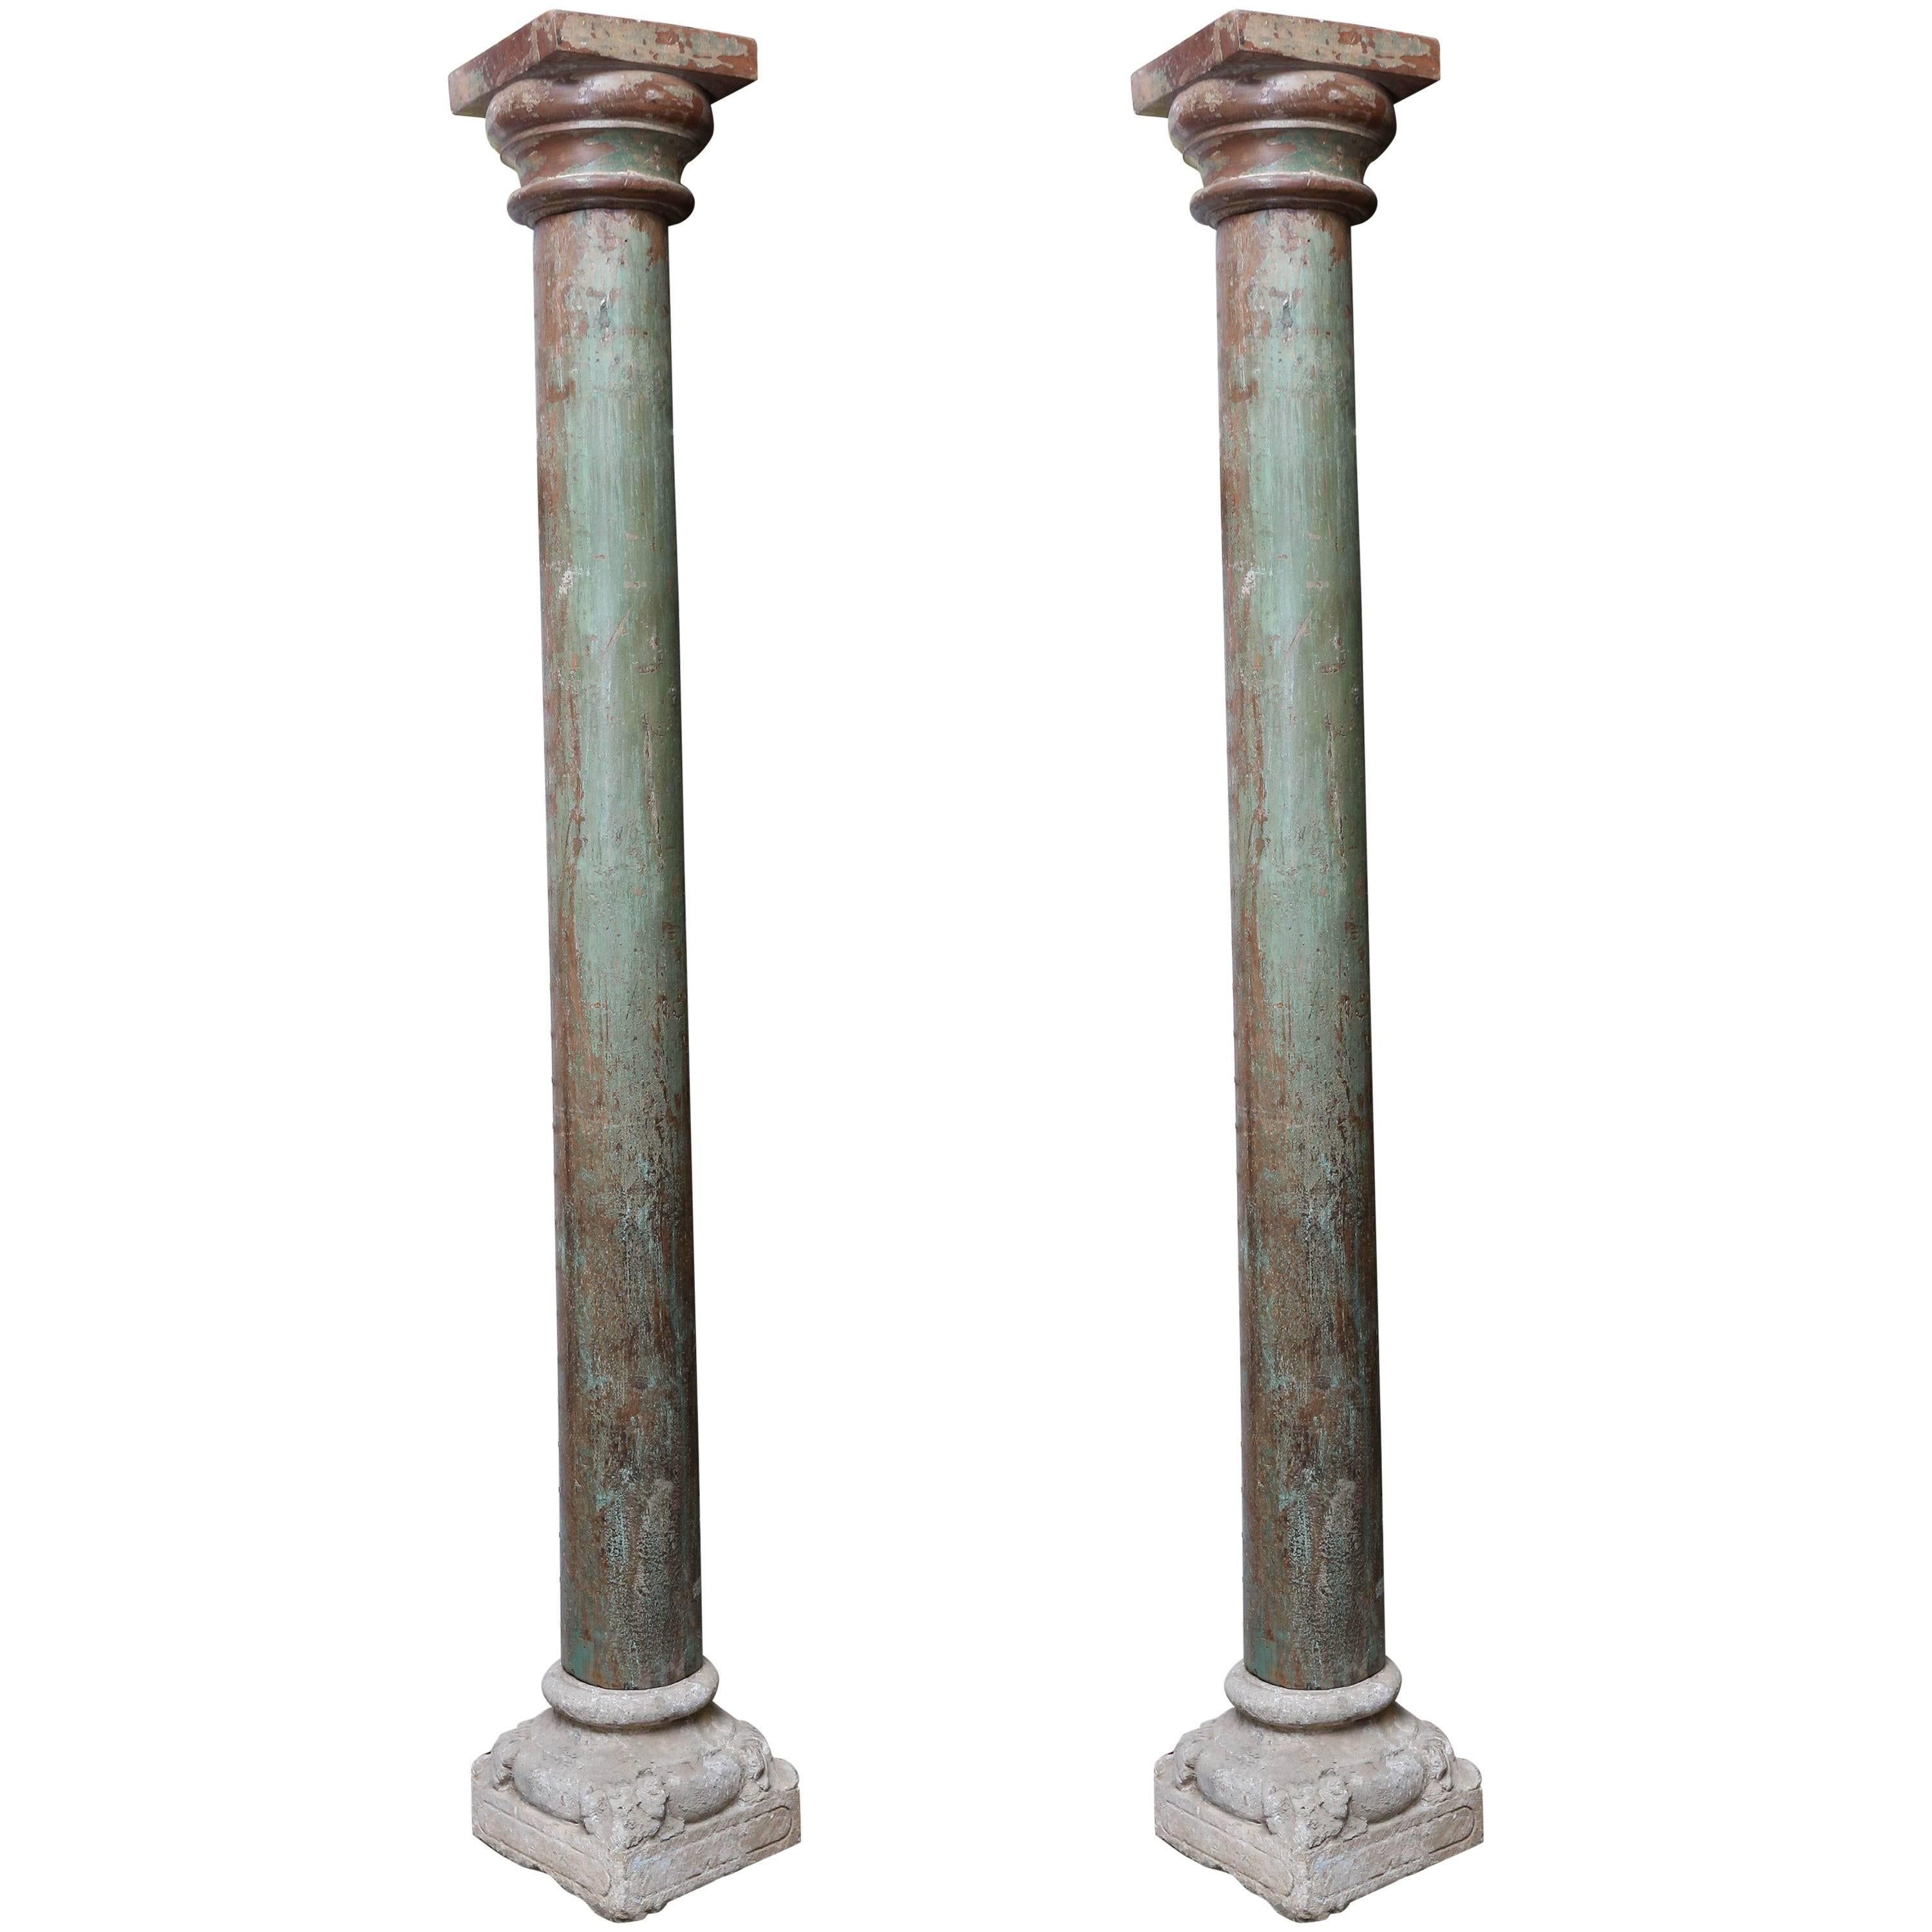 Pair of Early 19th Century Solid Teak Wood Load Bearing Columns For Sale